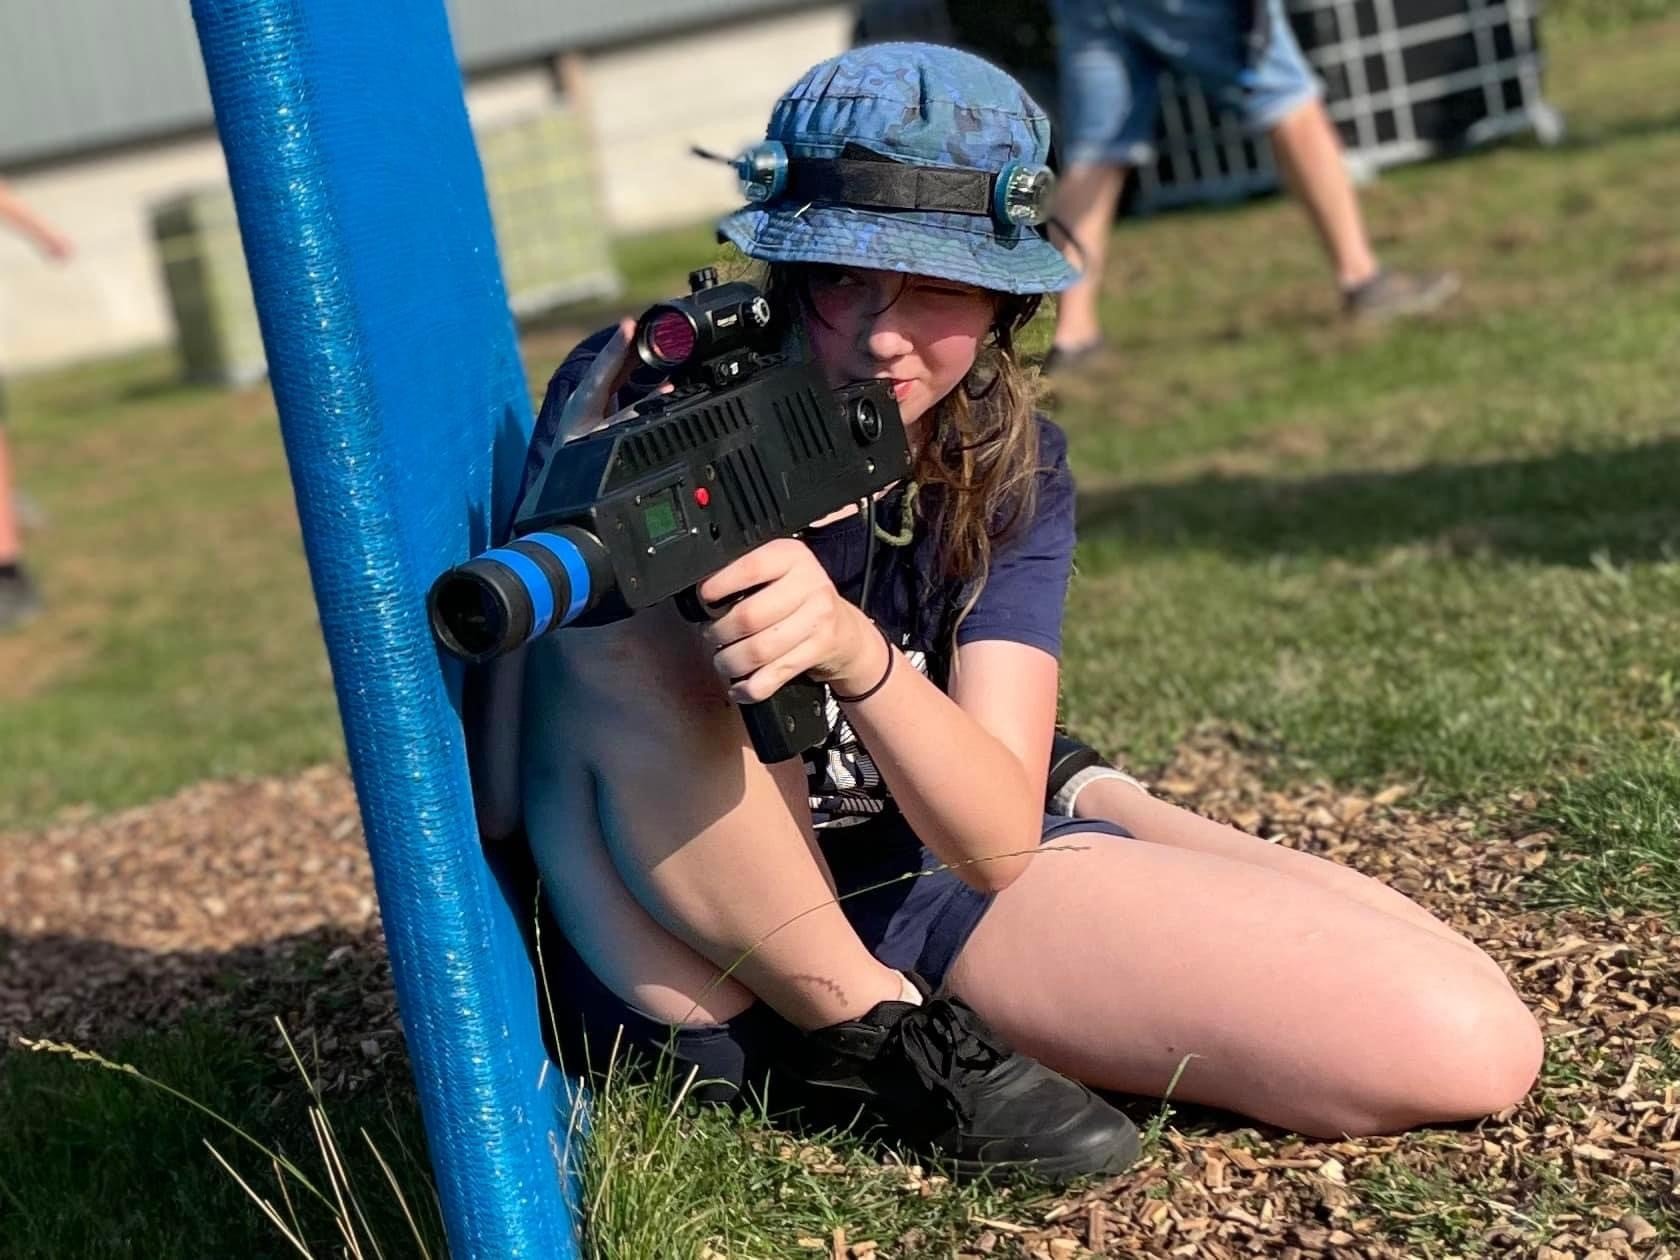 Outdoor laser tag – public open session